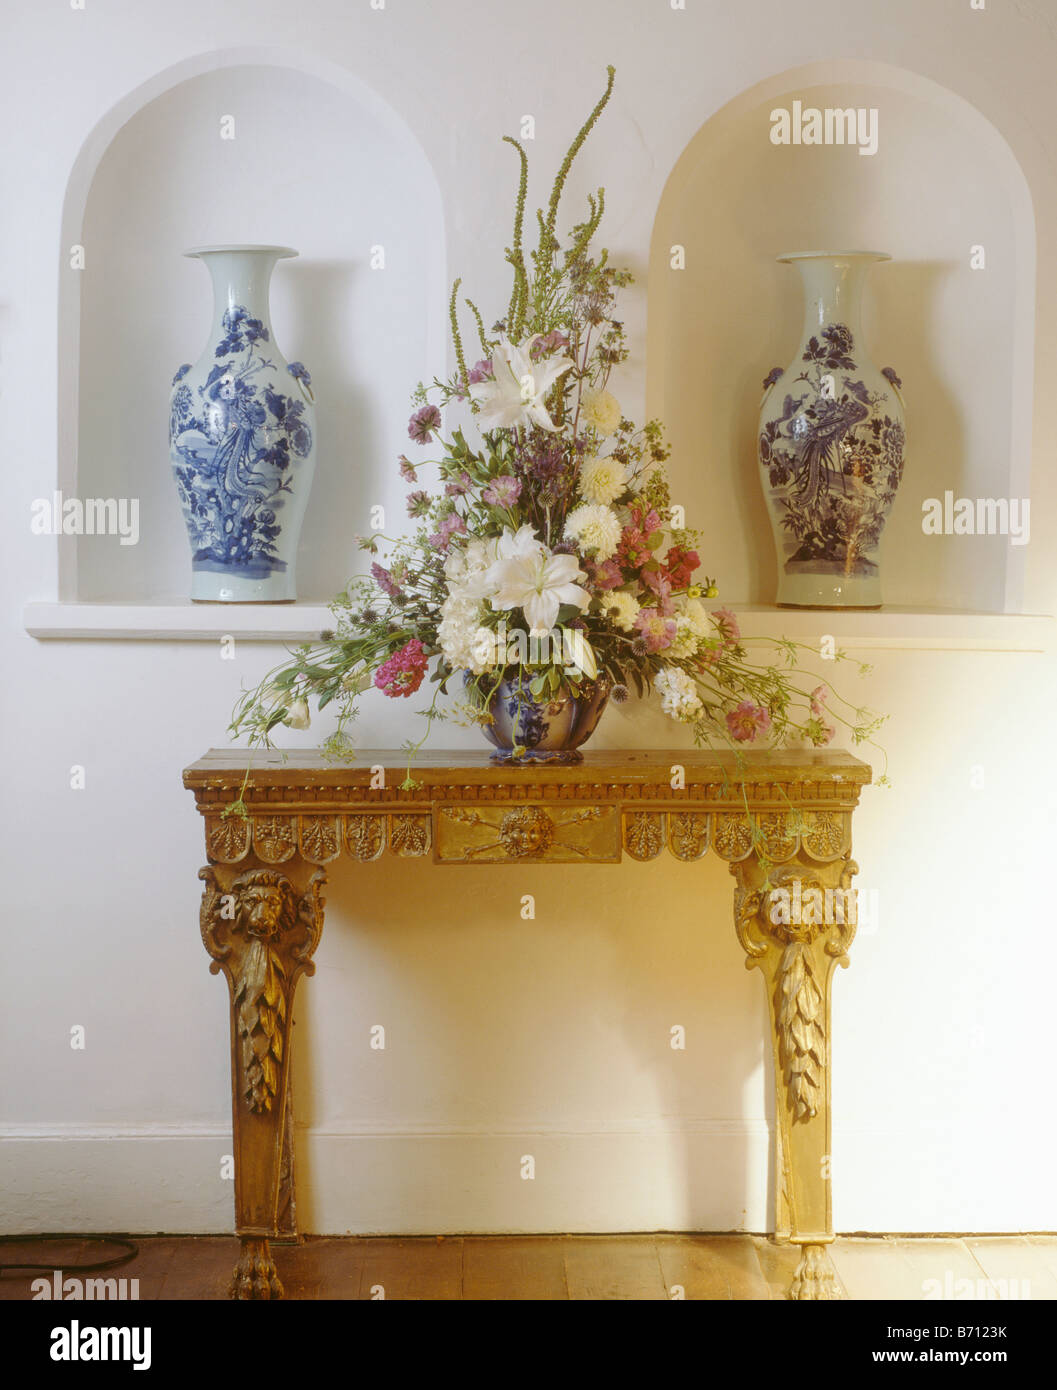 Vase Flowers On Hall Table High Resolution Stock Photography And Images Alamy